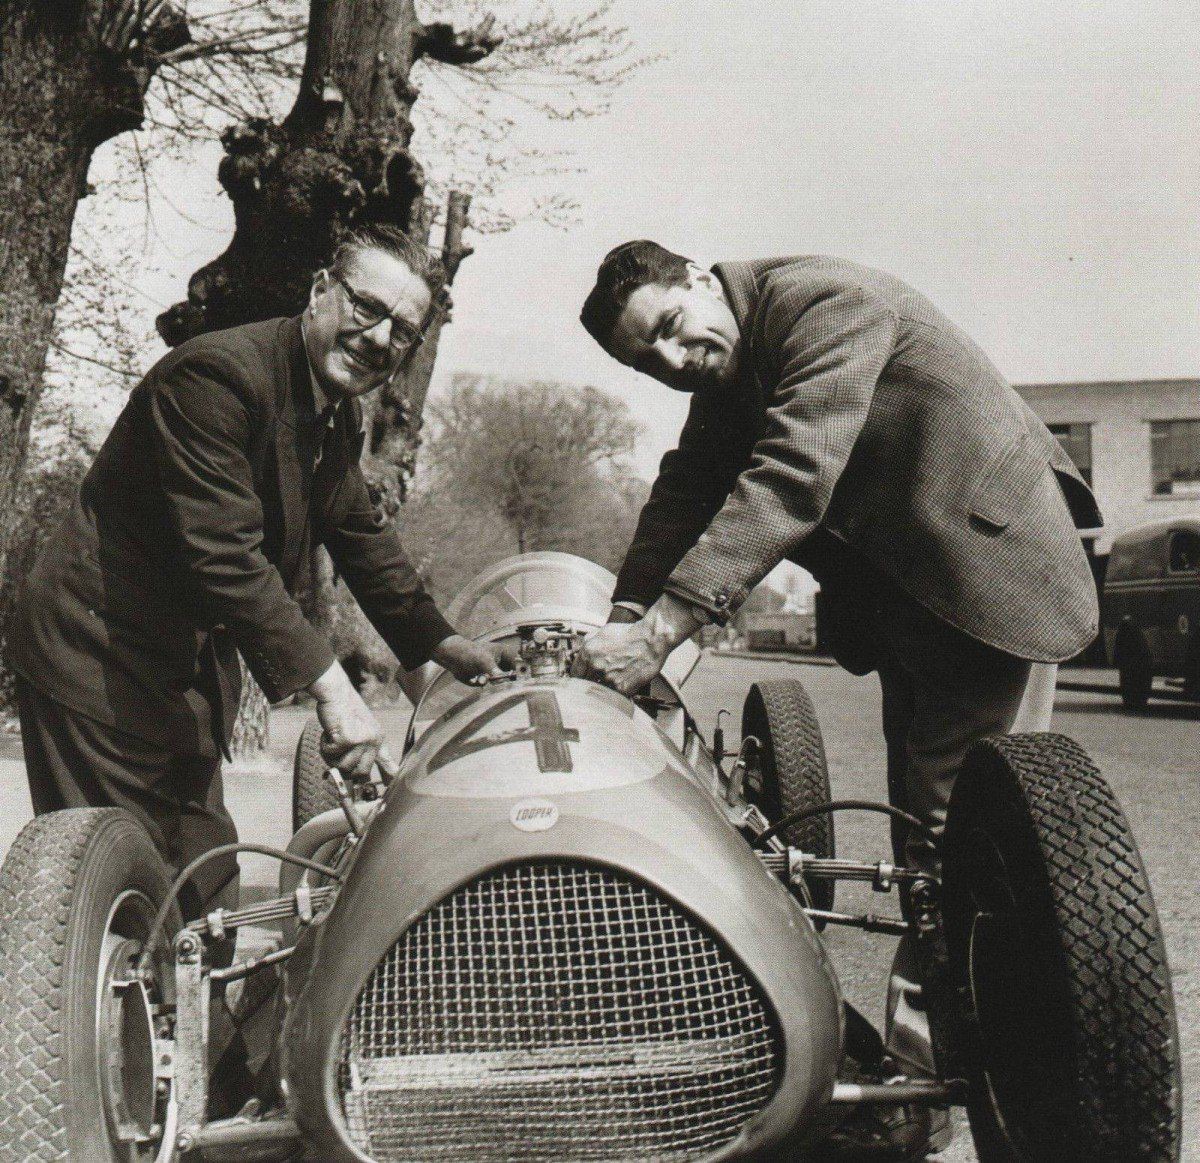 John Cooper with one of his cars.